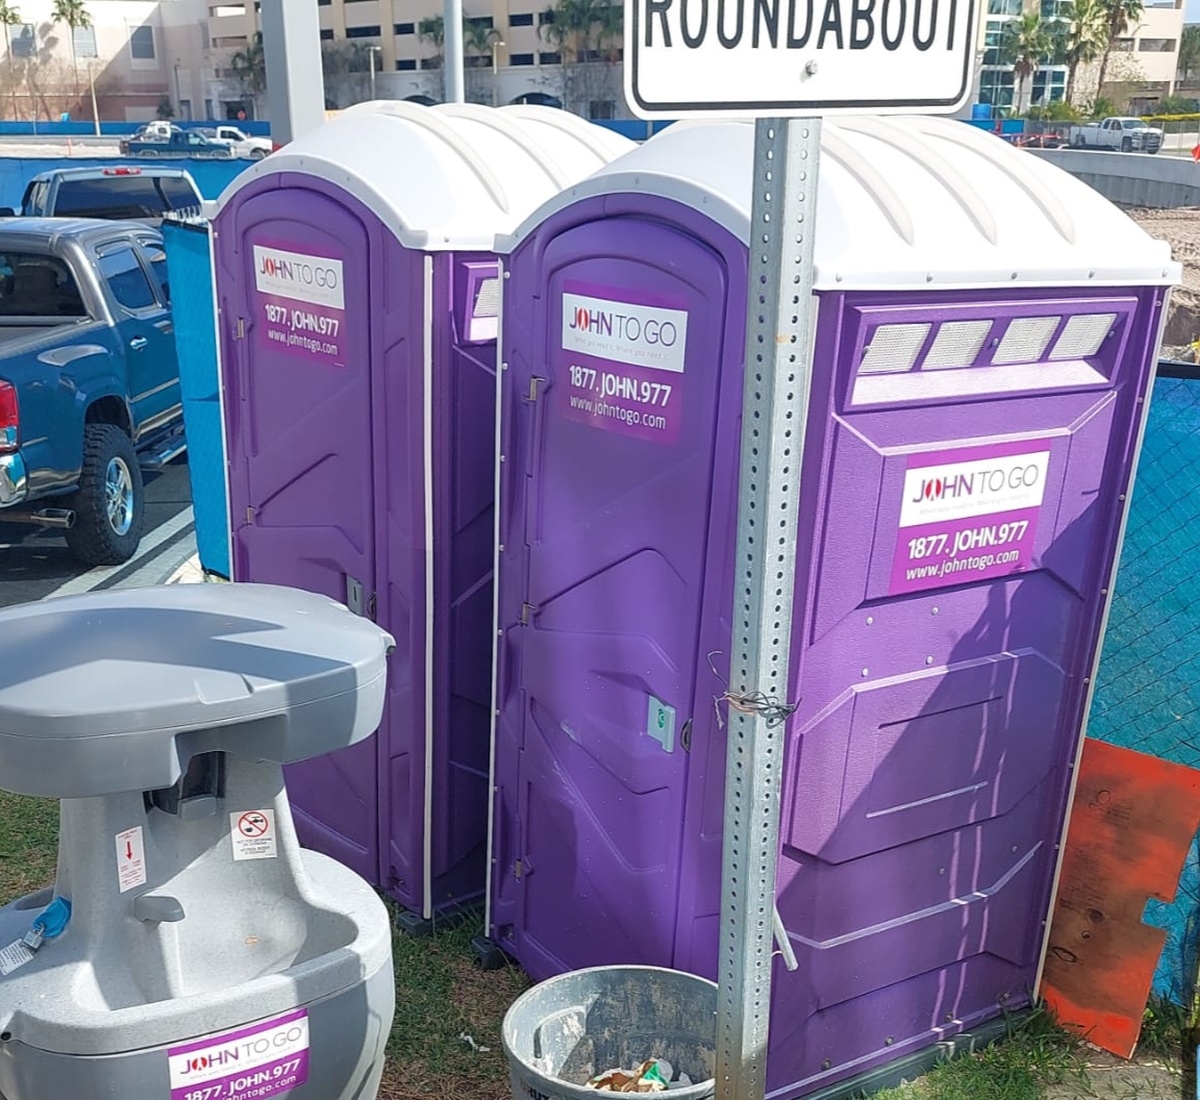 Portable hand washing station at construction site